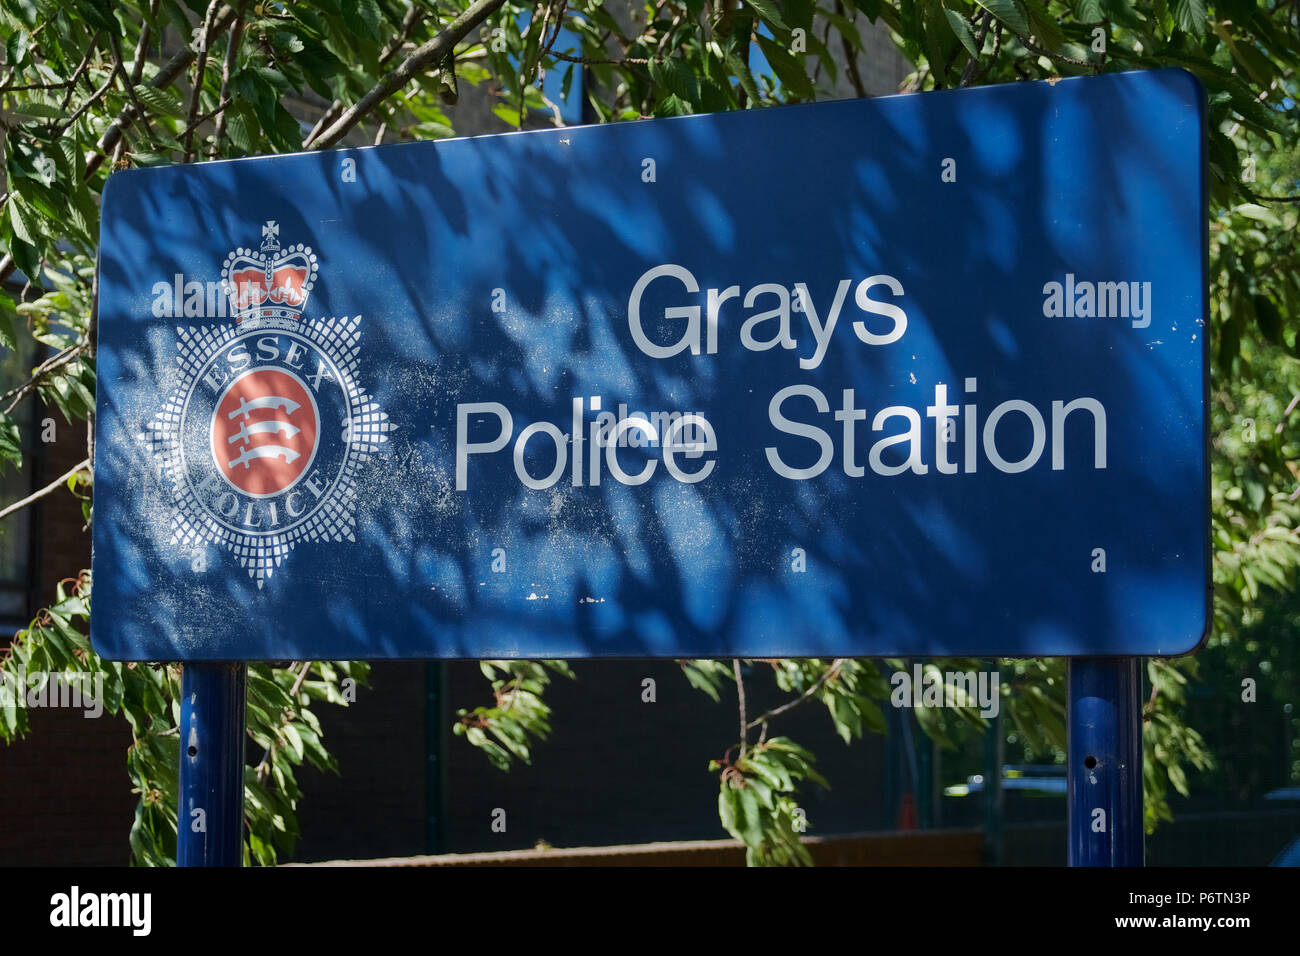 A view of the sign outside Grays Police Station in Essex, UK    Credit:  Ben Rector/Alamy Stock Photo Stock Photo